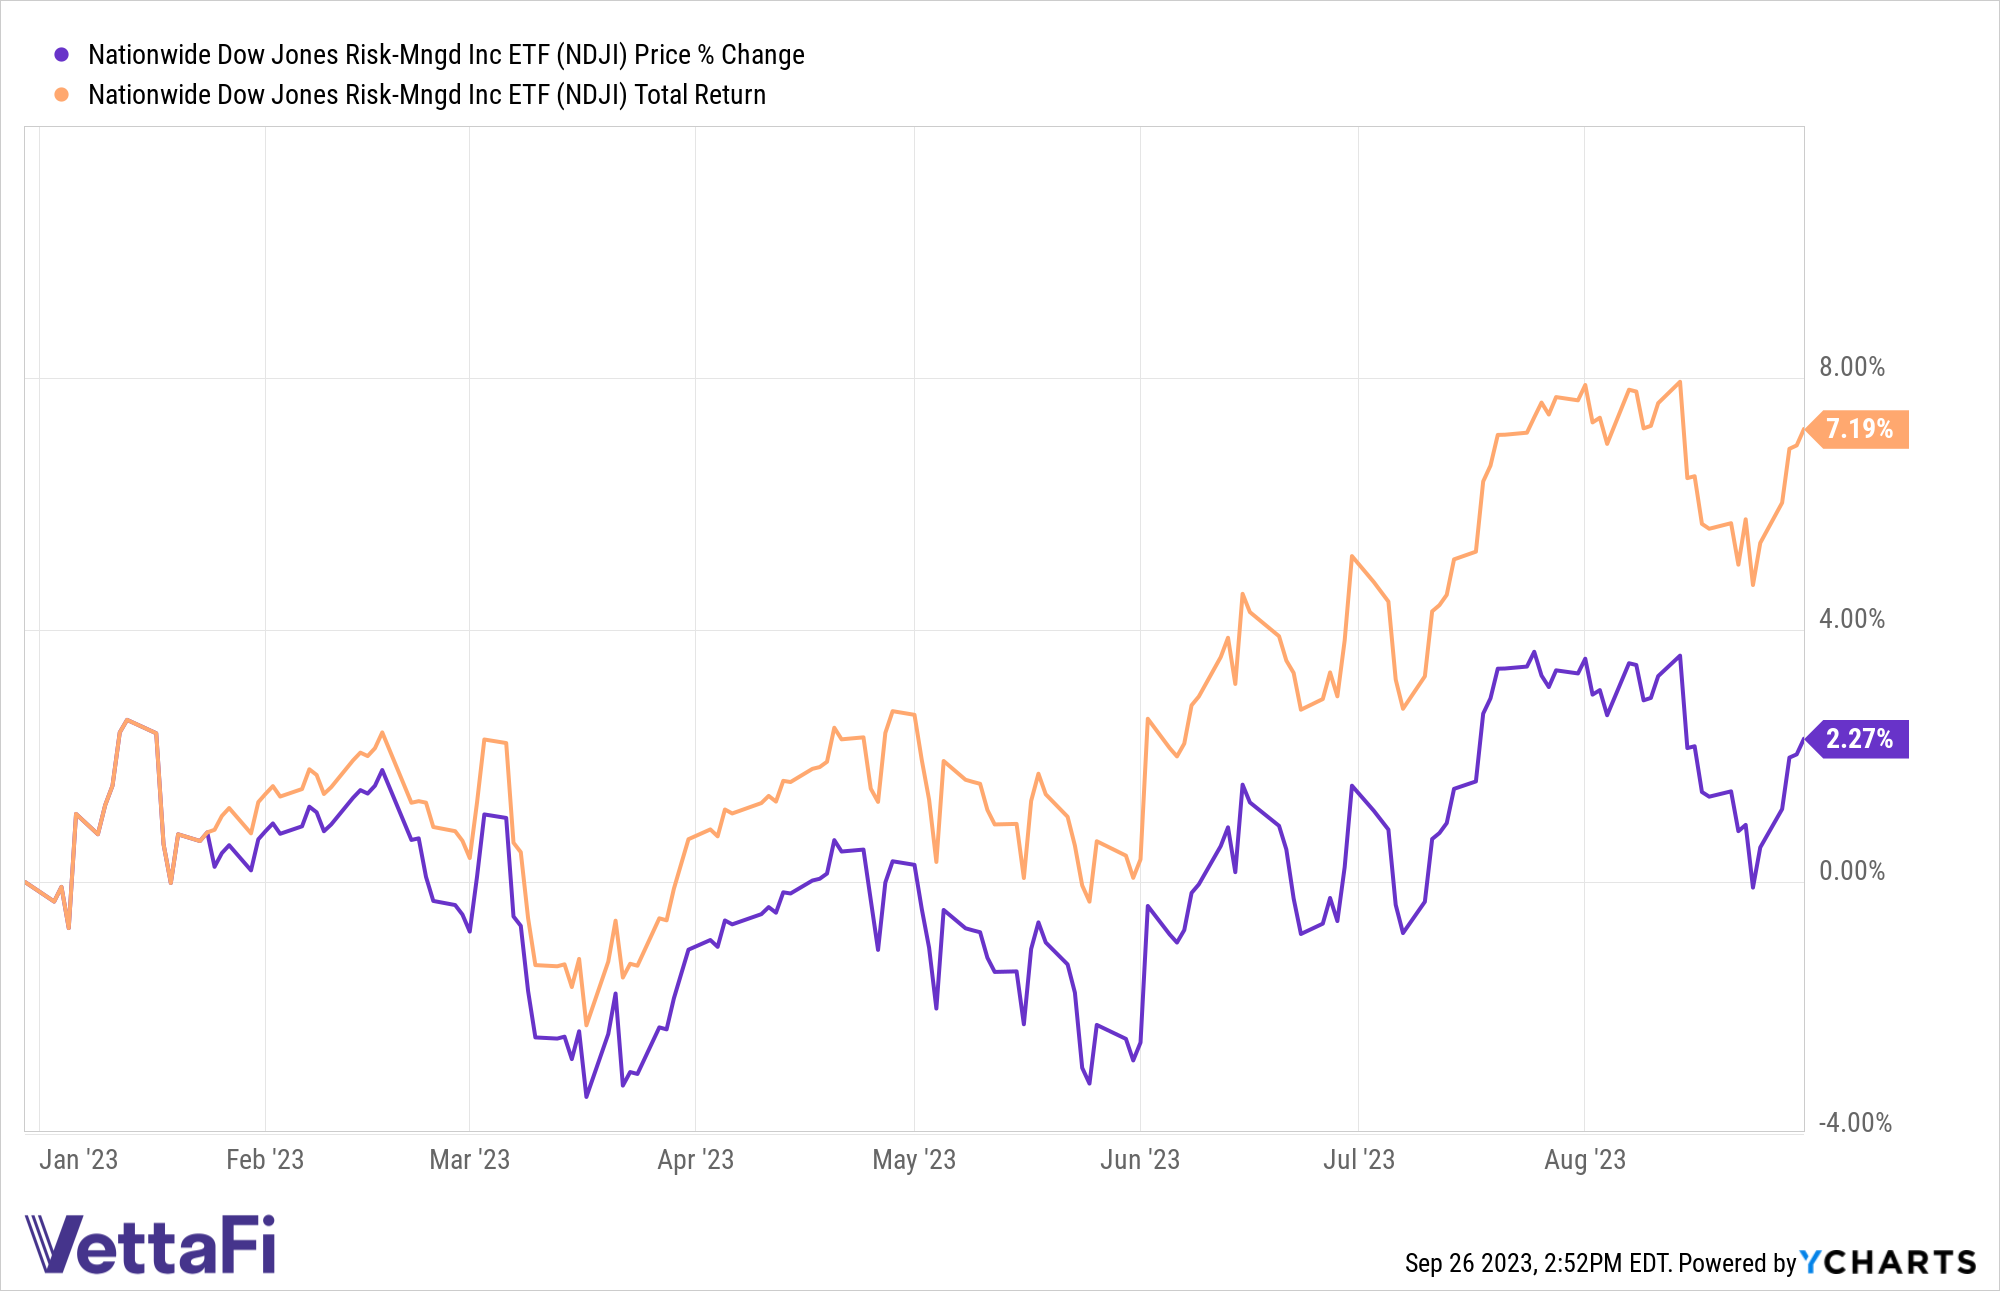 Price returns chart and total returns chart of NDJI between January 1 and August 31, 2023. 